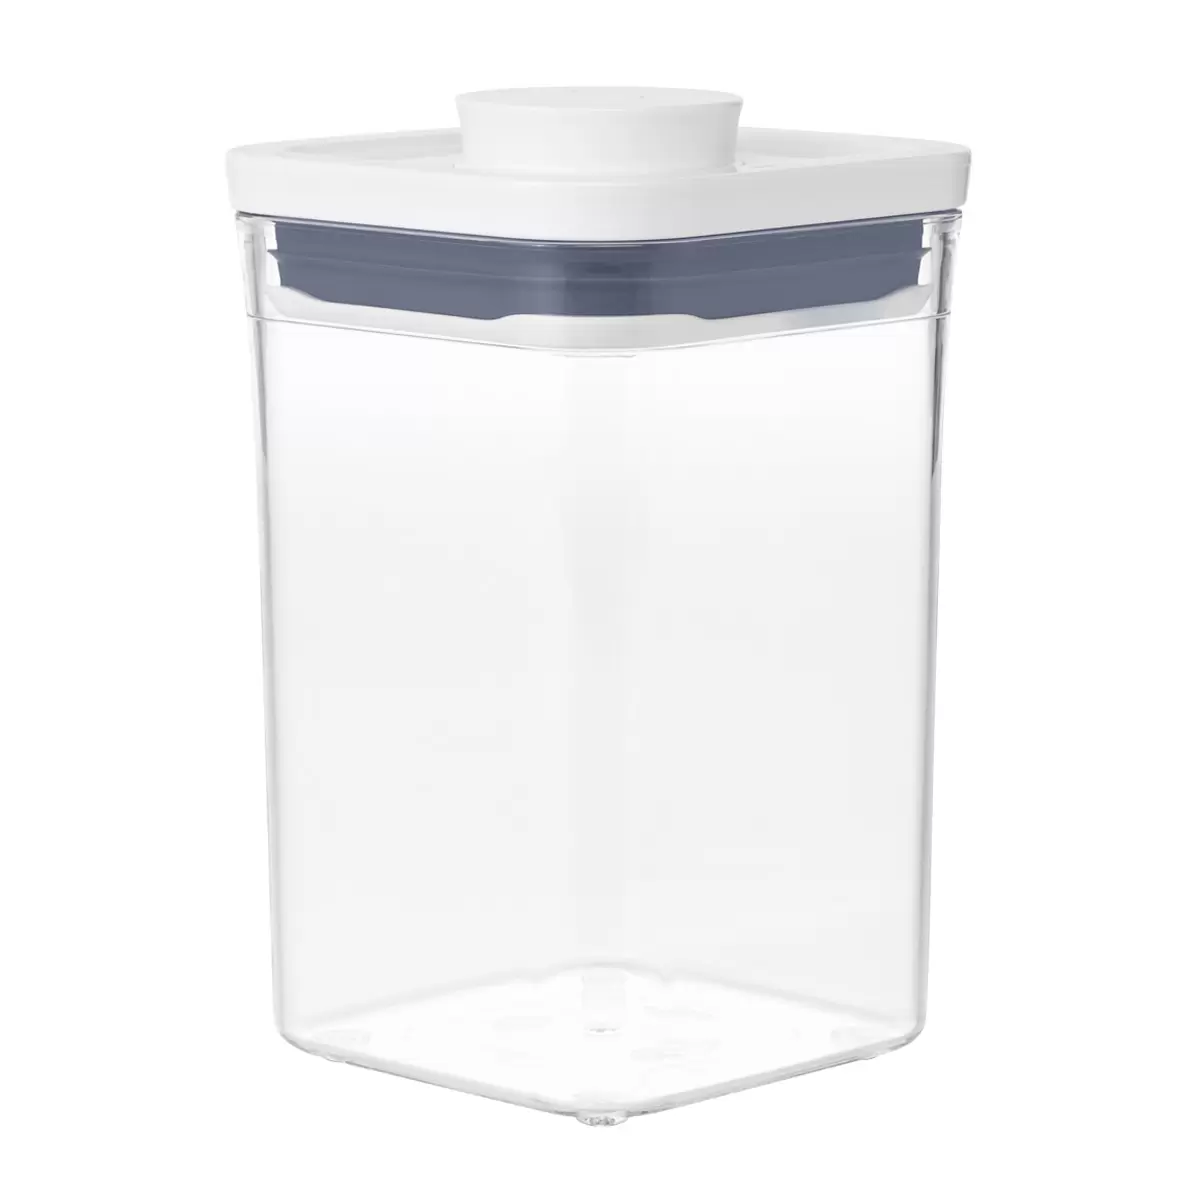 https://www.containerstore.com/catalogimages/369091/10075145-OXO-1.1-qt-POP-Container-Sm.jpg